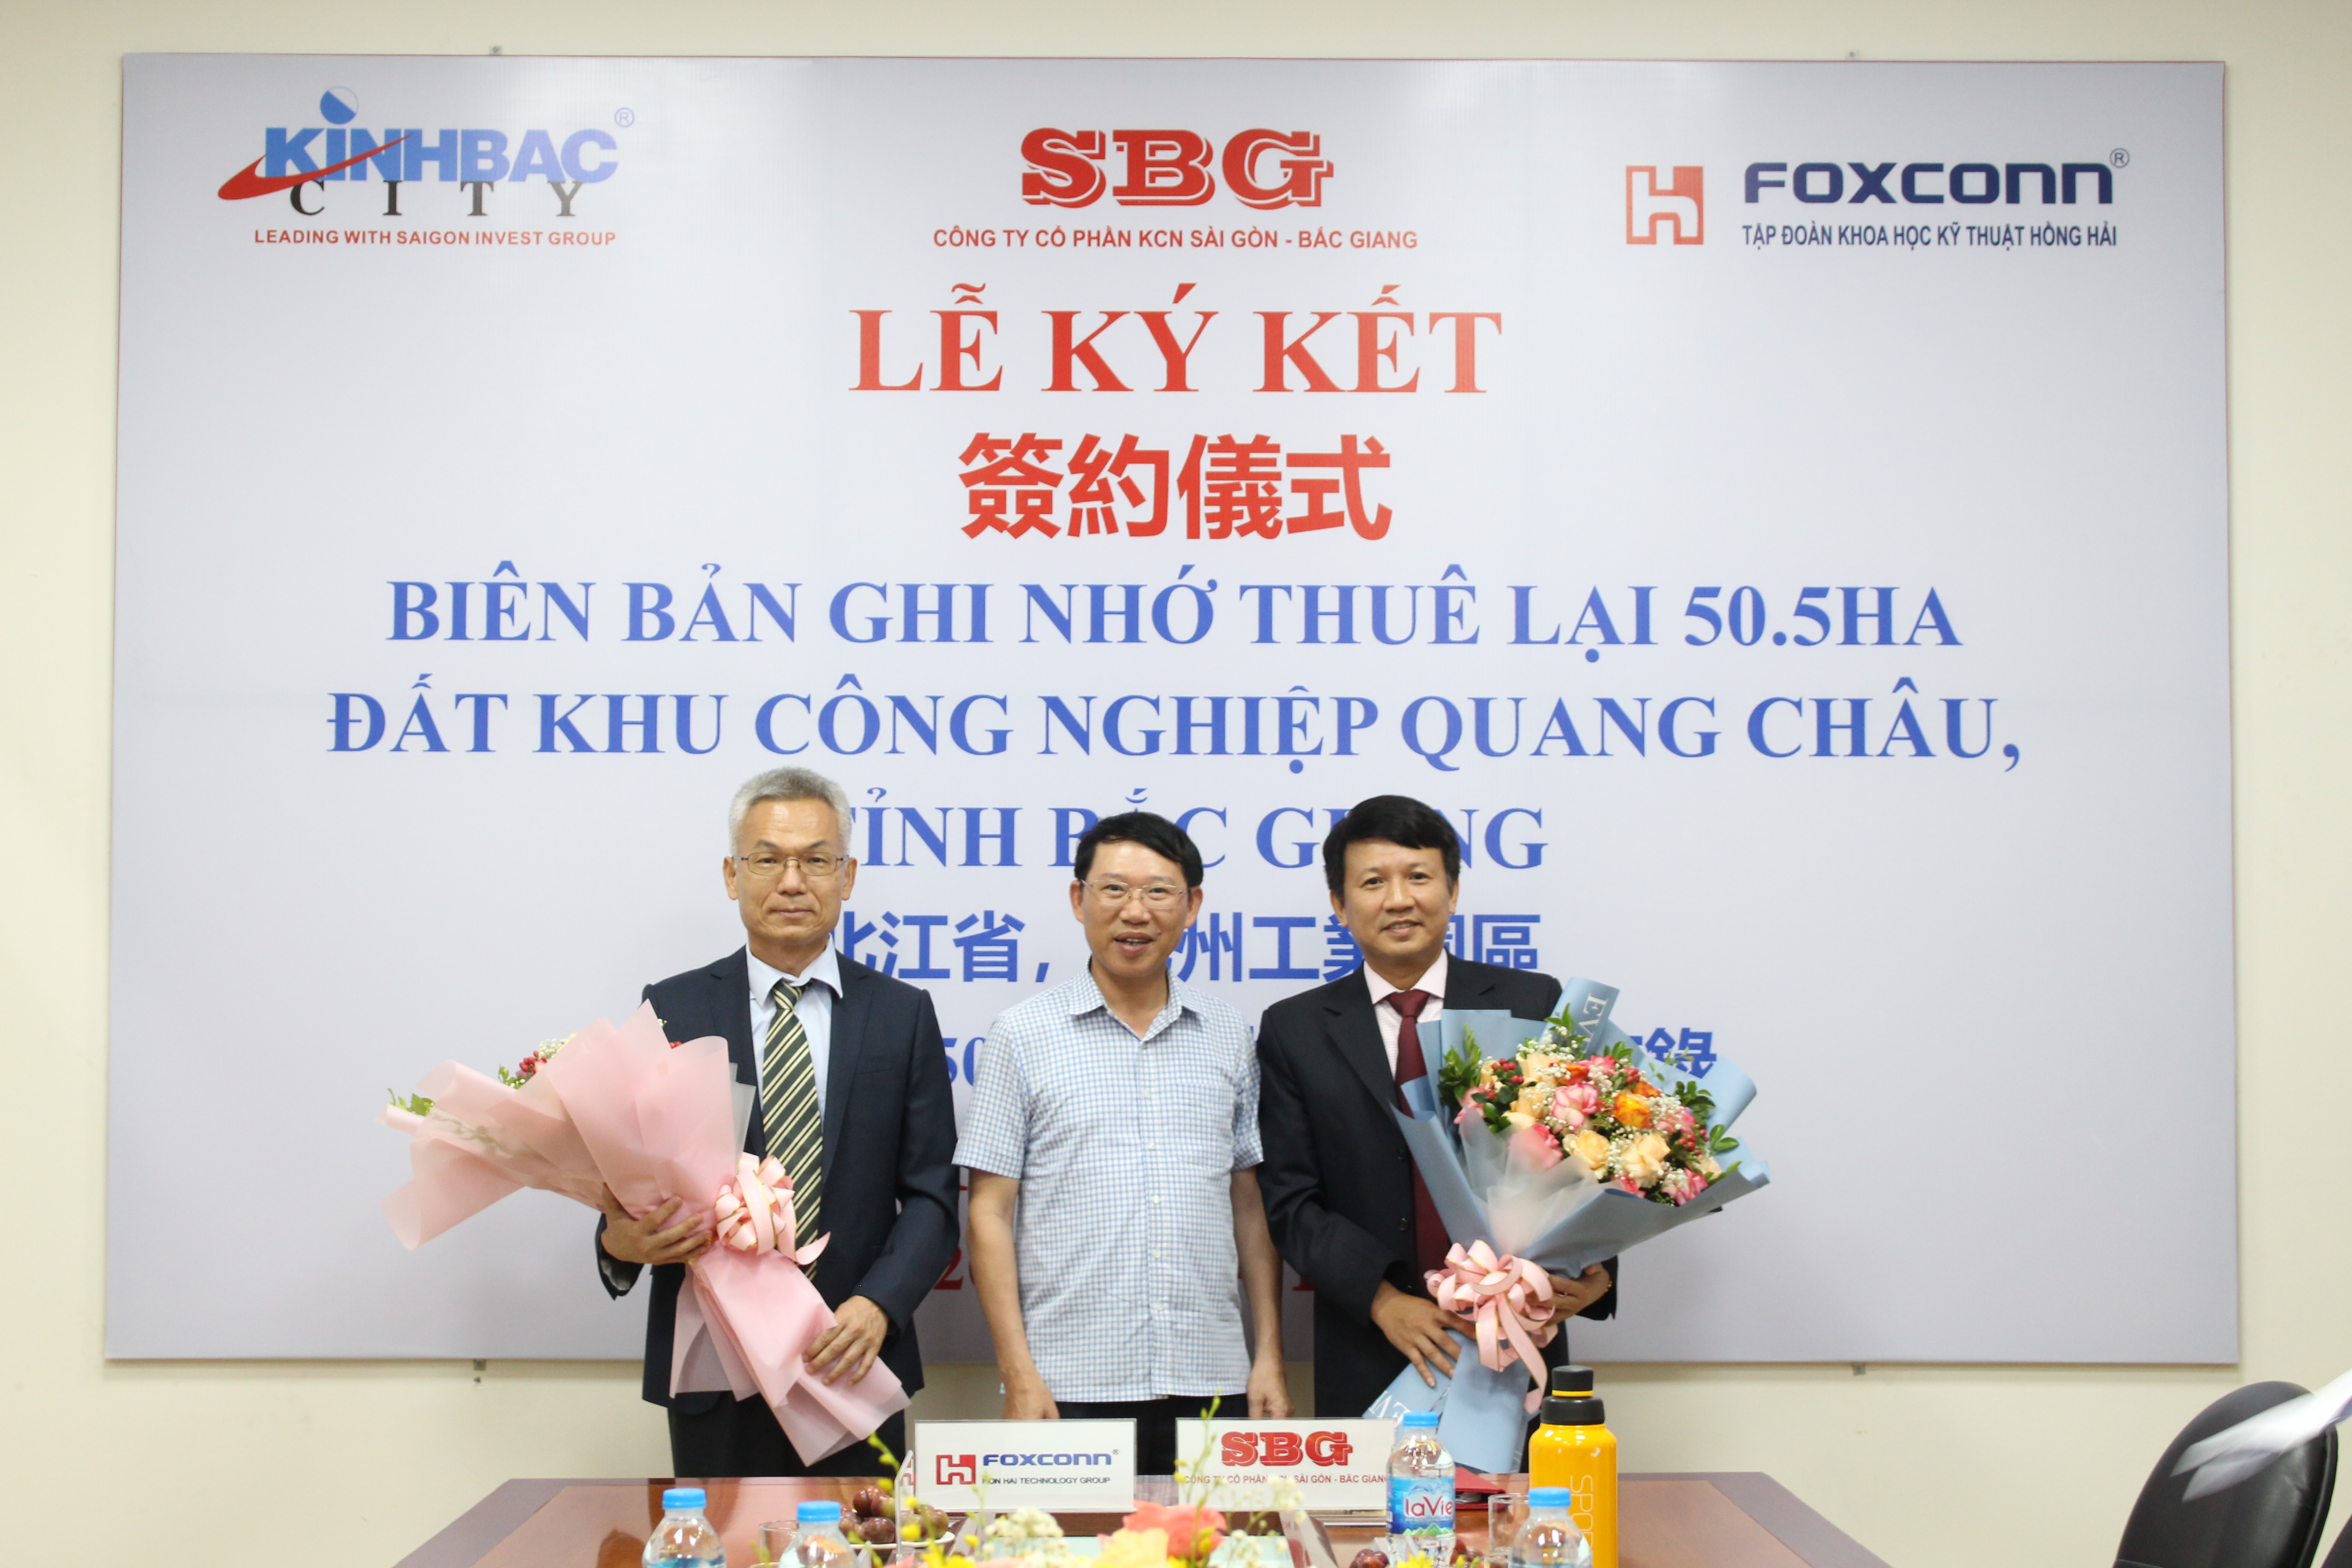 Chairman of Bac Giang Province Le Anh Duong (C) and representatives of Foxconn and Saigon - Bac Giang Industrial Park JSC (SBG) during the signing ceremony. Photo: SBG